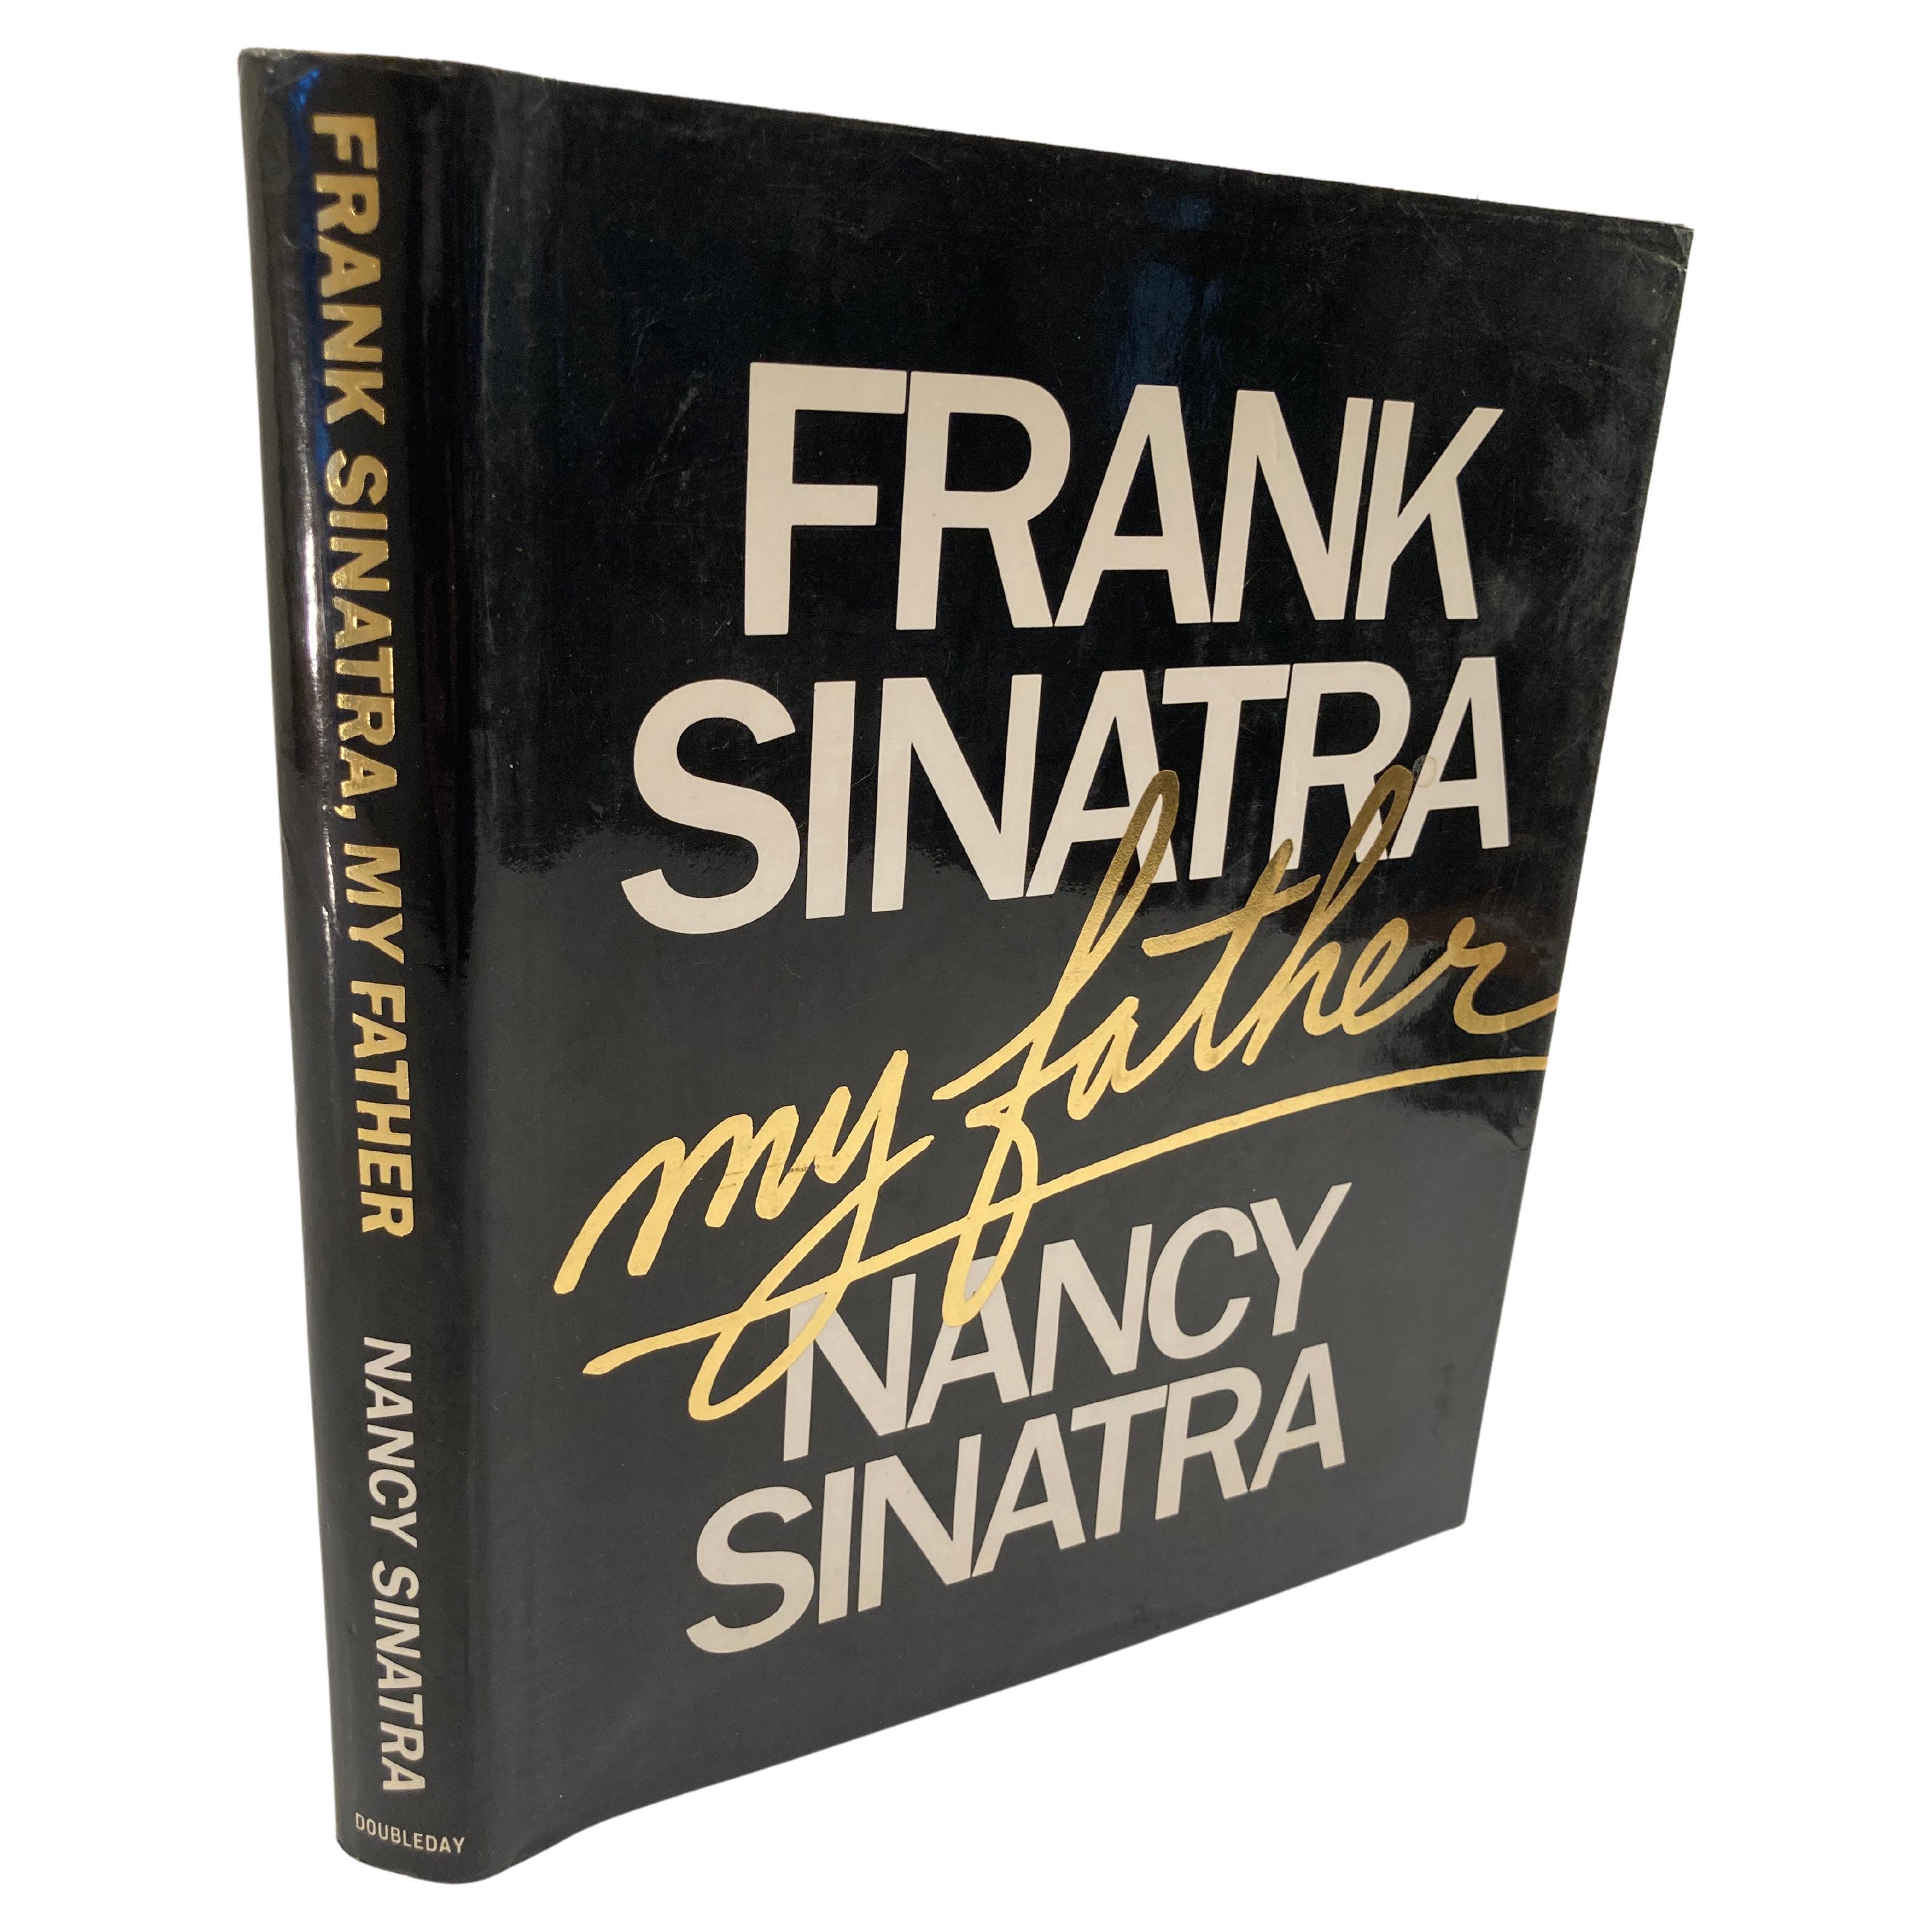 Frank Sinatra, My Father Collectible Book by Nancy Sinatra